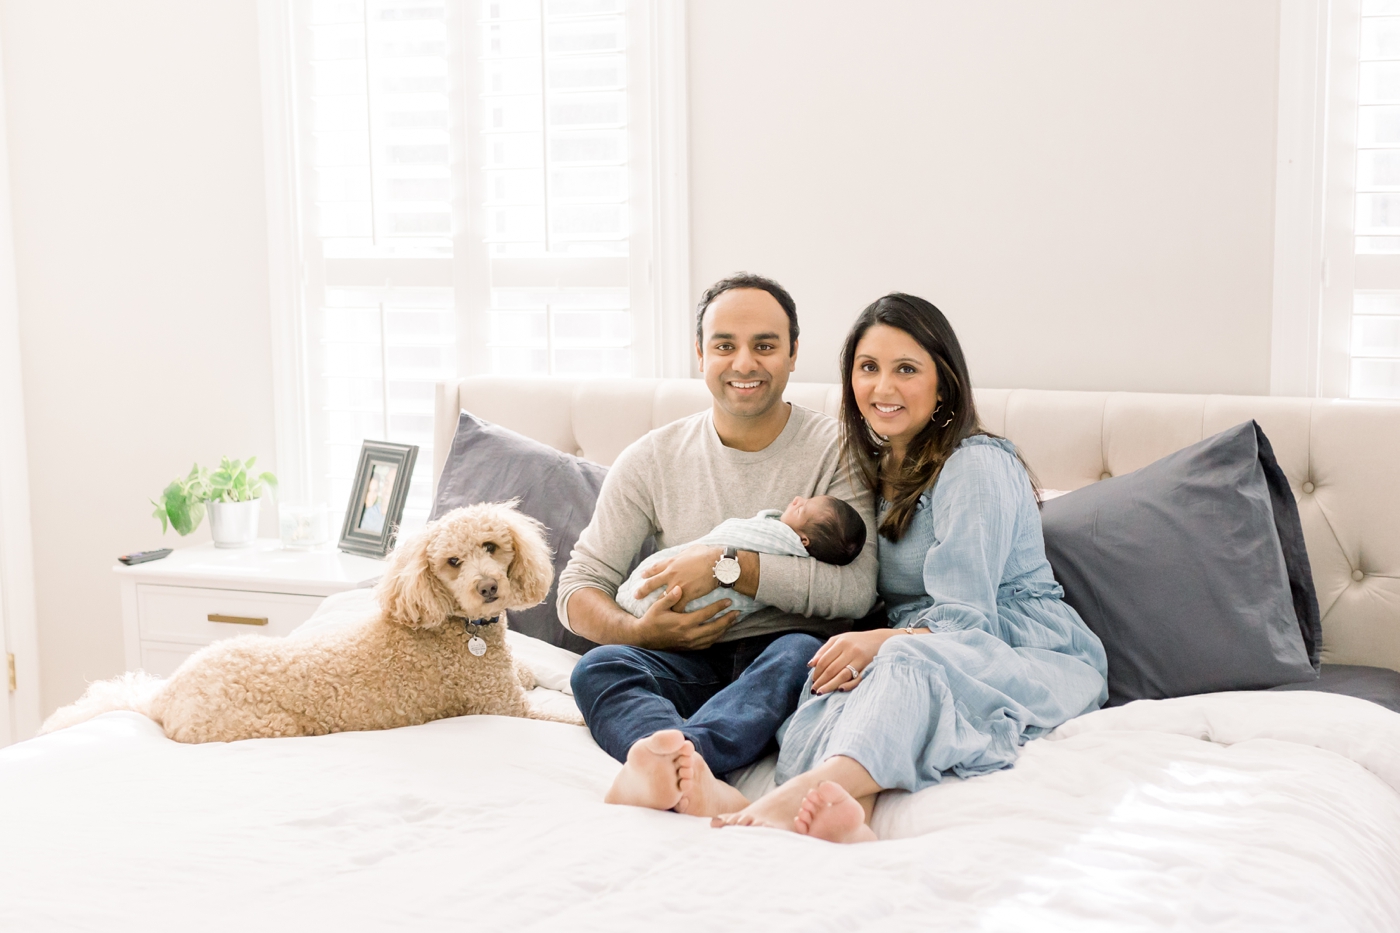 In-home newborn session including the family's dog. Photo by Caitlyn Motycka Photography.